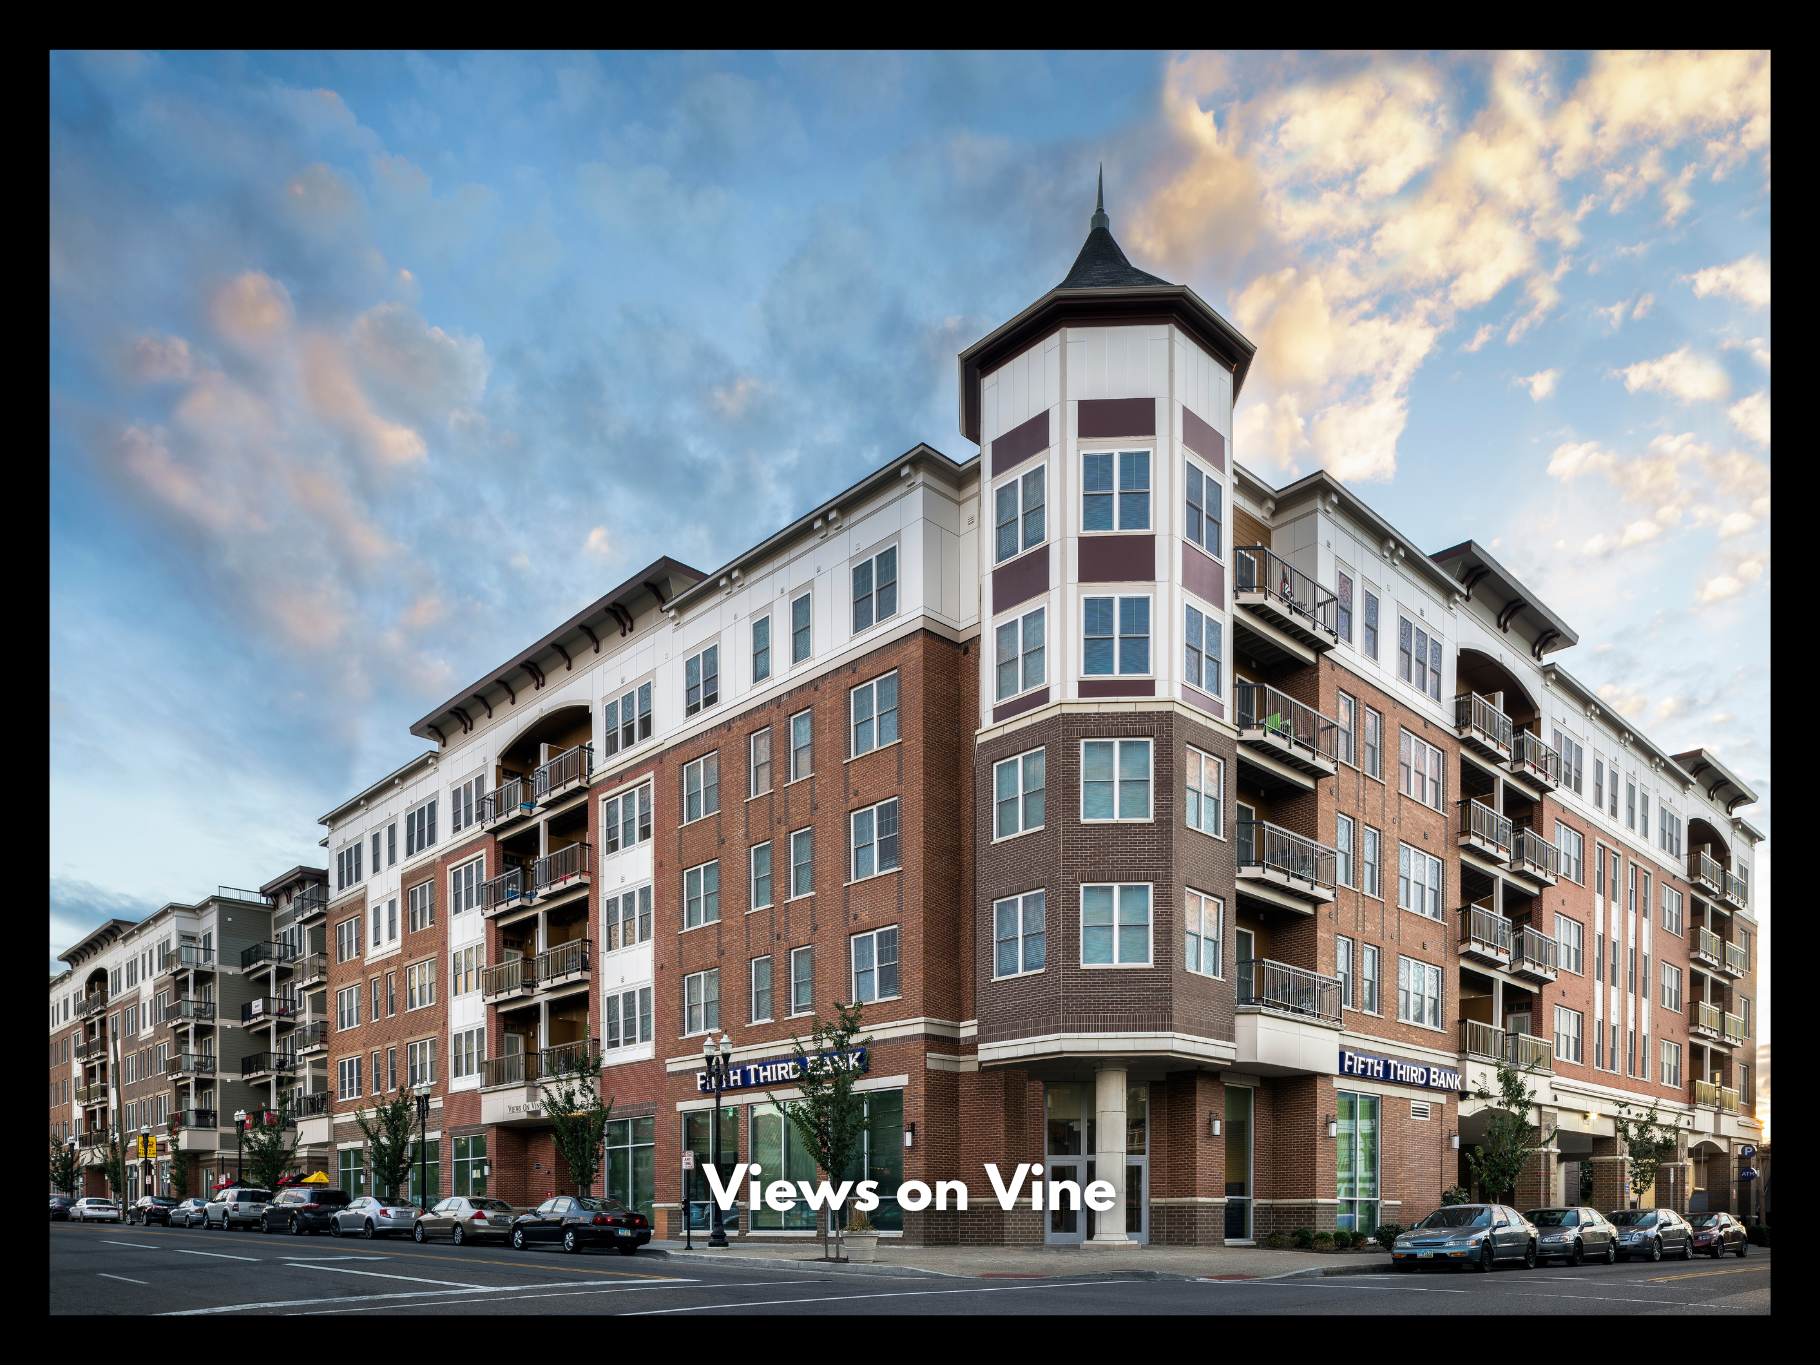 Exterior photo of commercial property Views on Vine